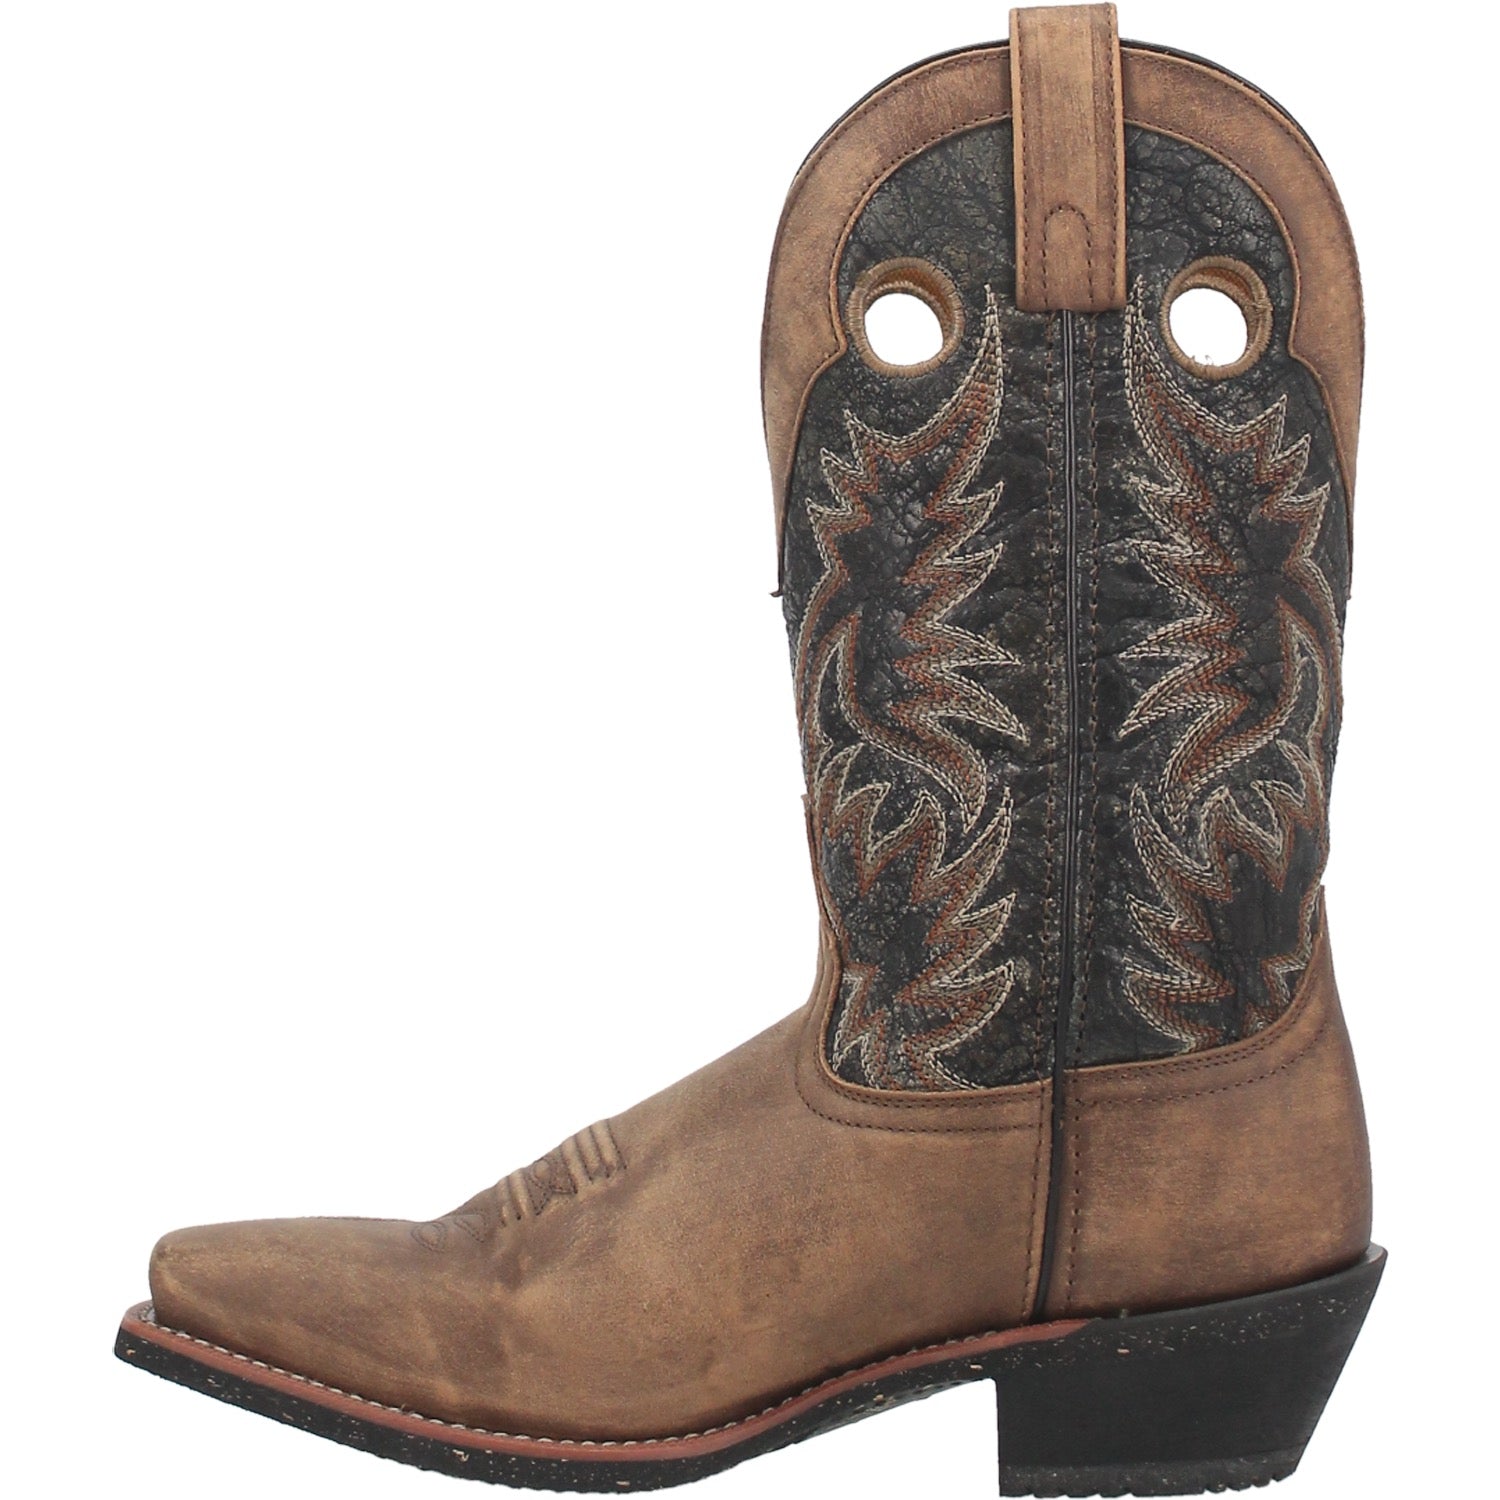 STILLWATER LEATHER BOOT Image